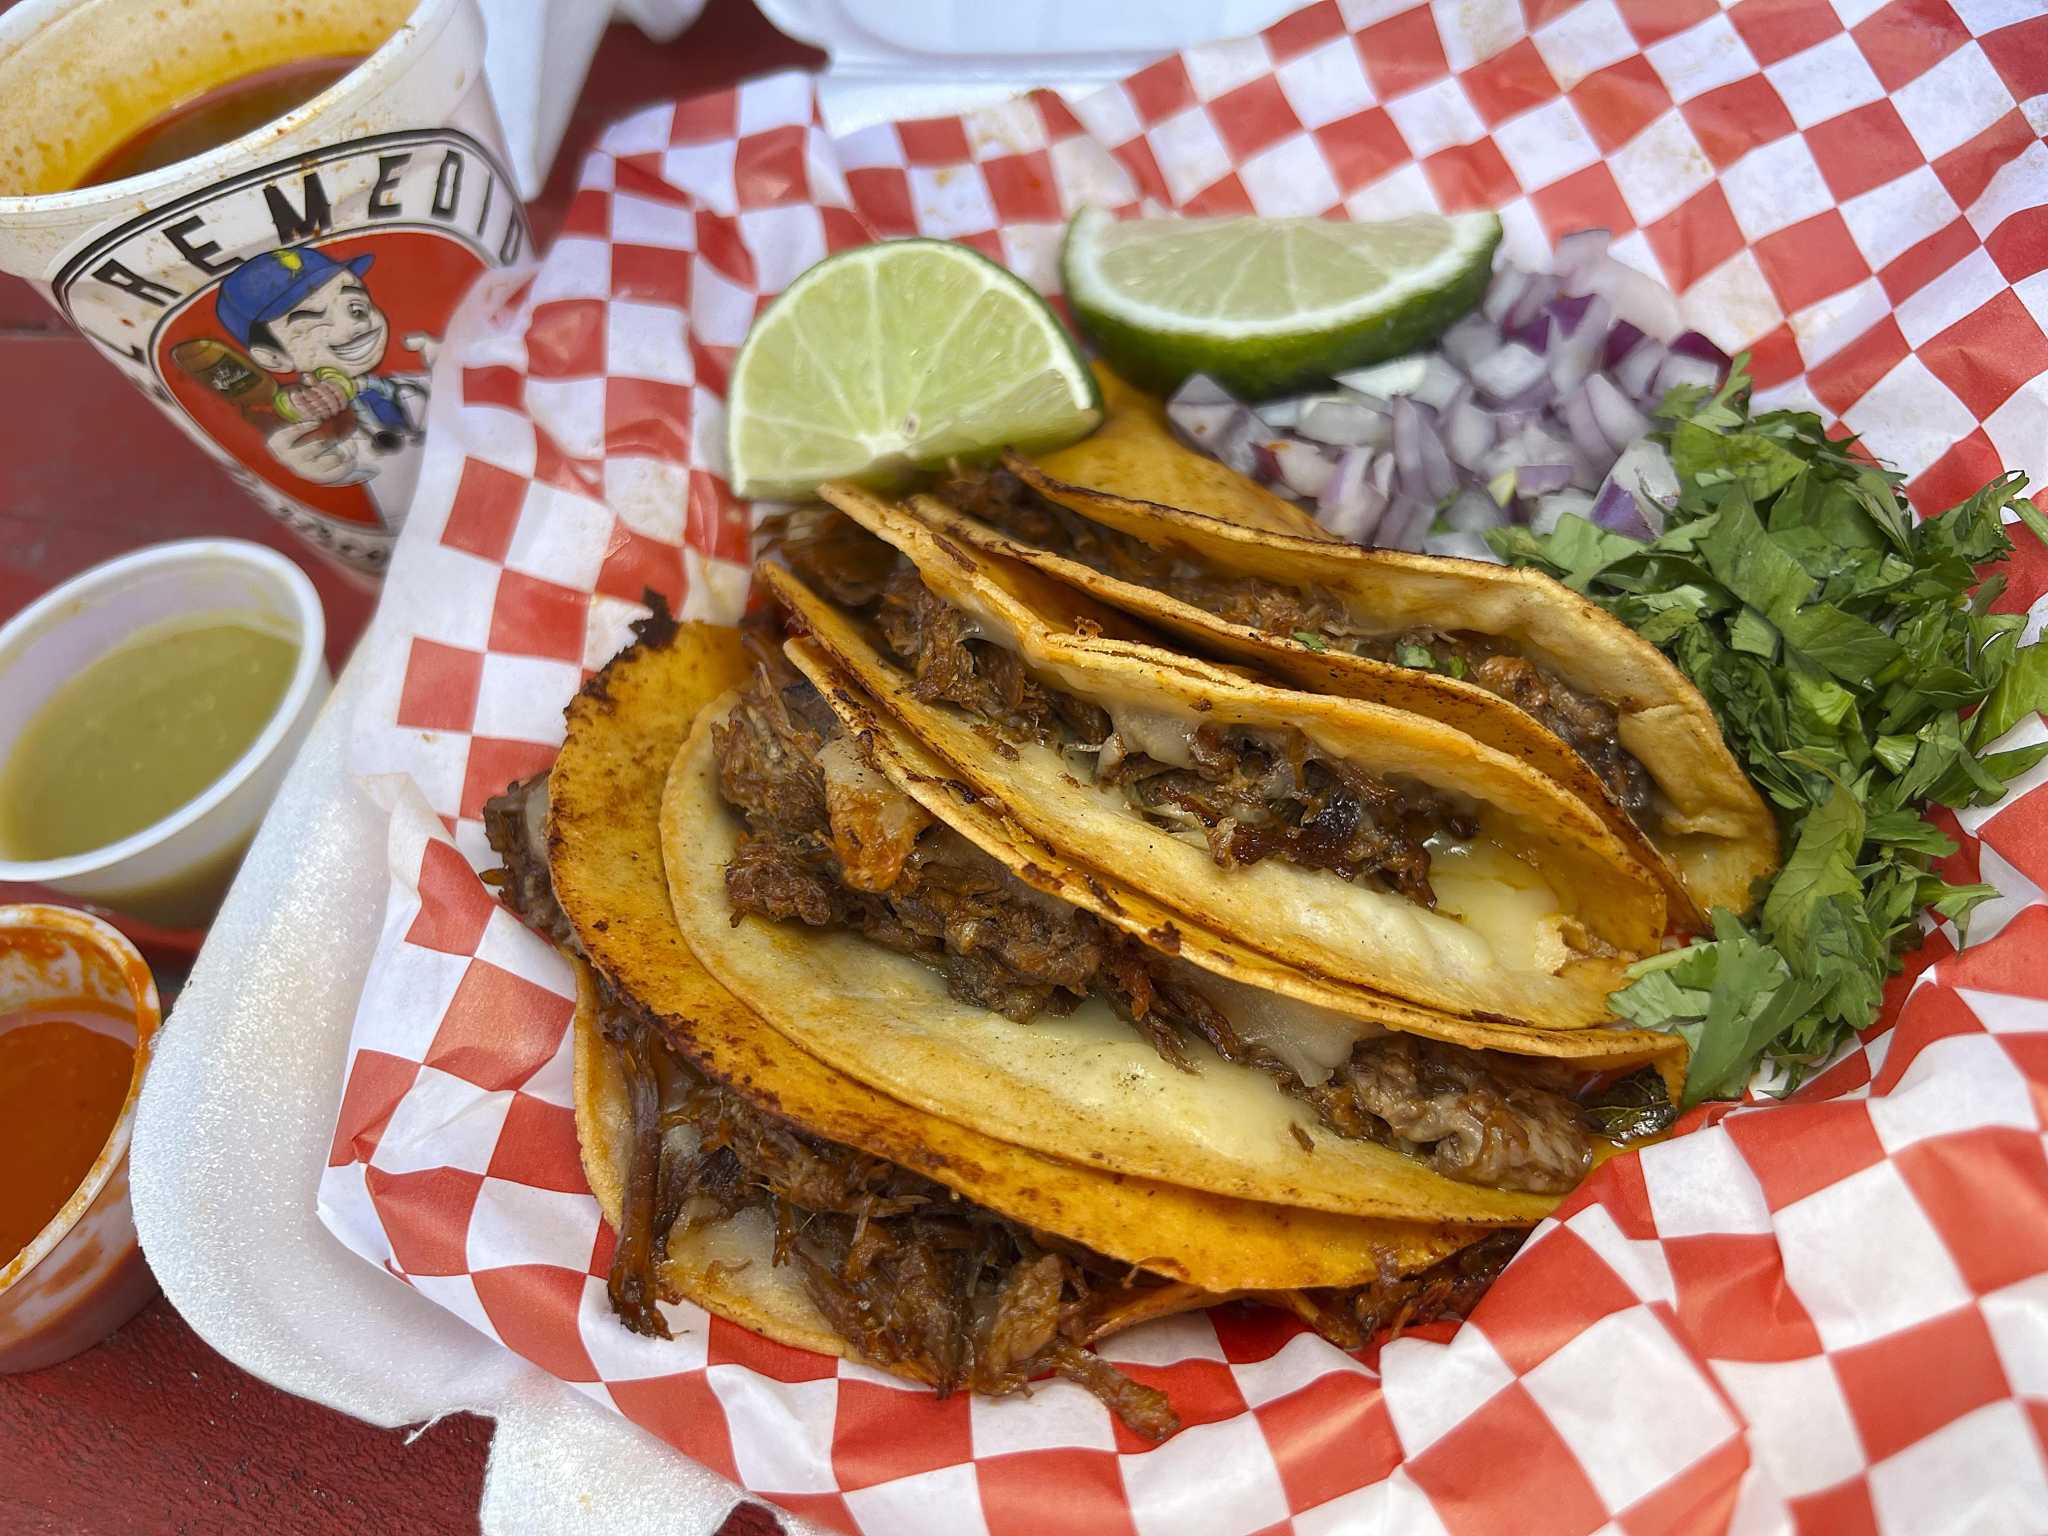 San Antonio's El Remedio Mexican food truck keeps birria craze going with  tacos and tortas worth the drive and the wait